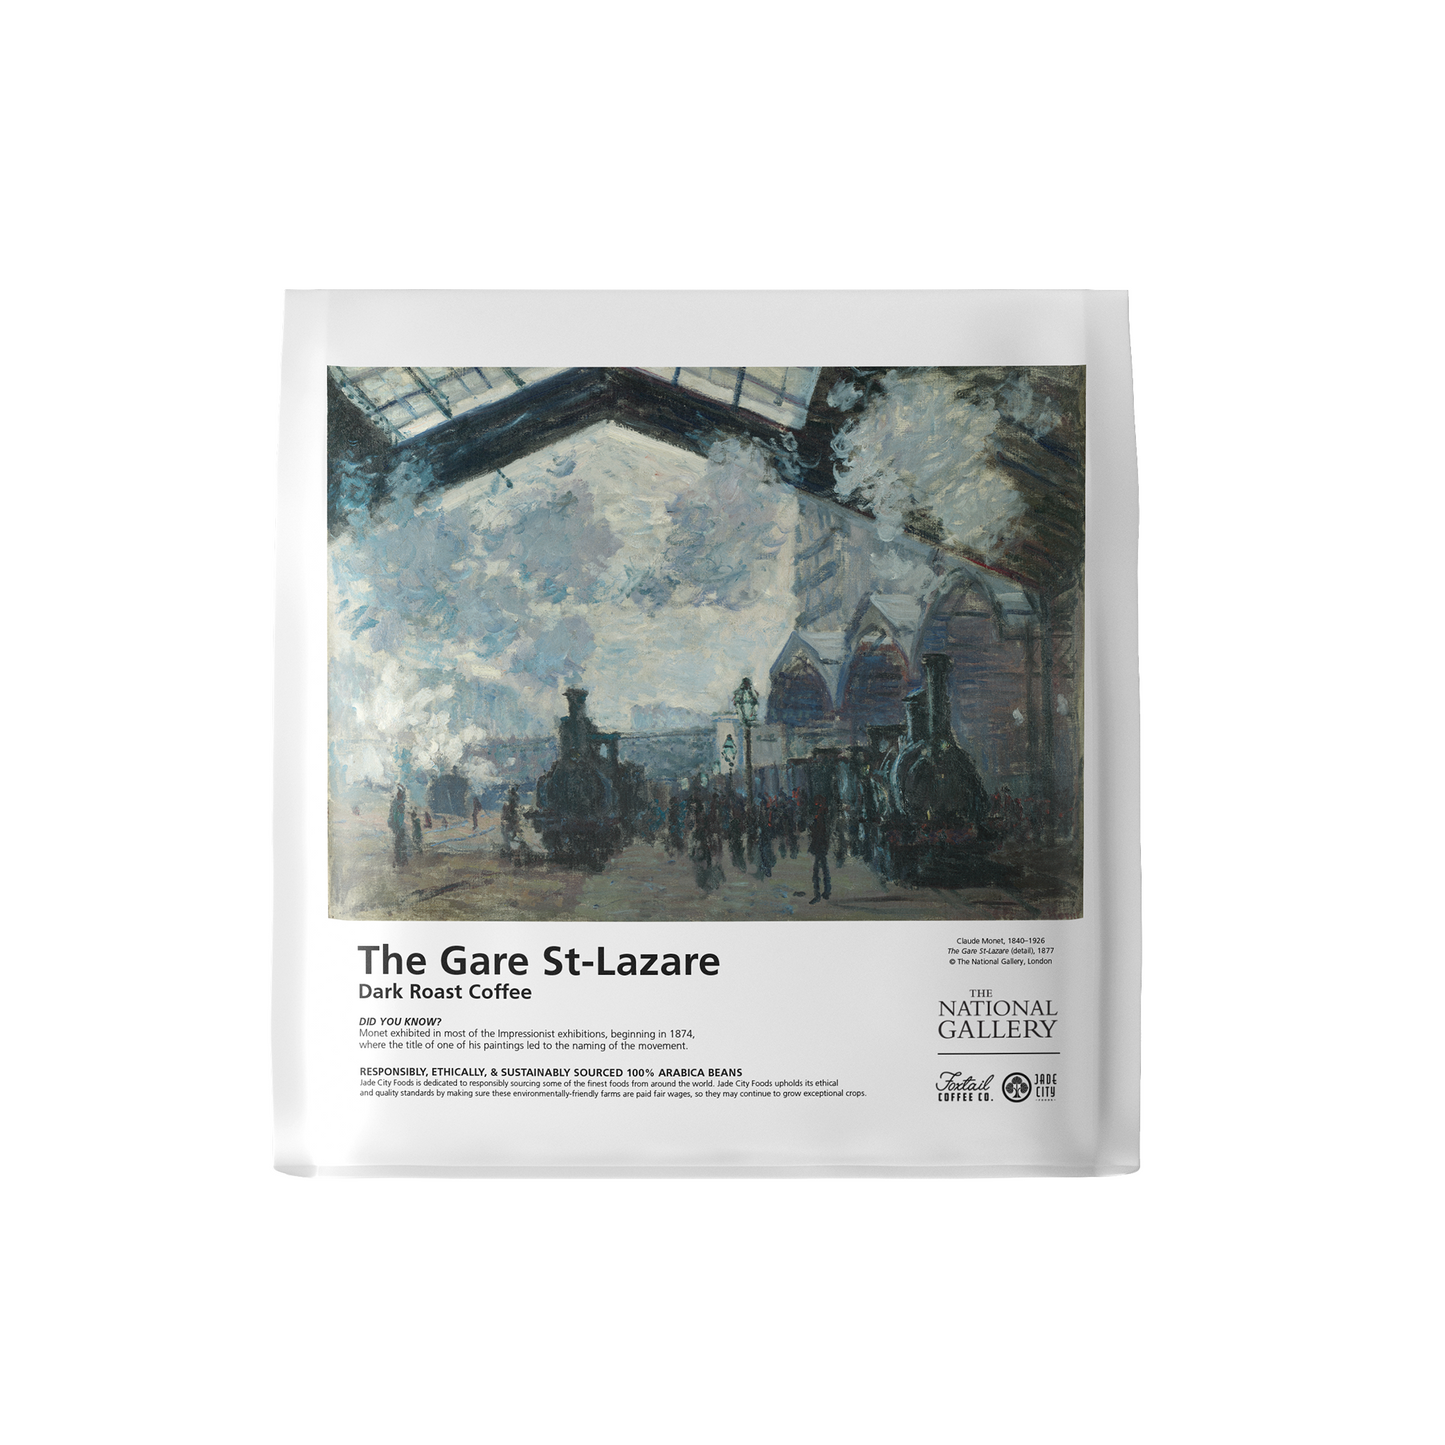 The National Gallery Coffee 3-Pack : Series 1